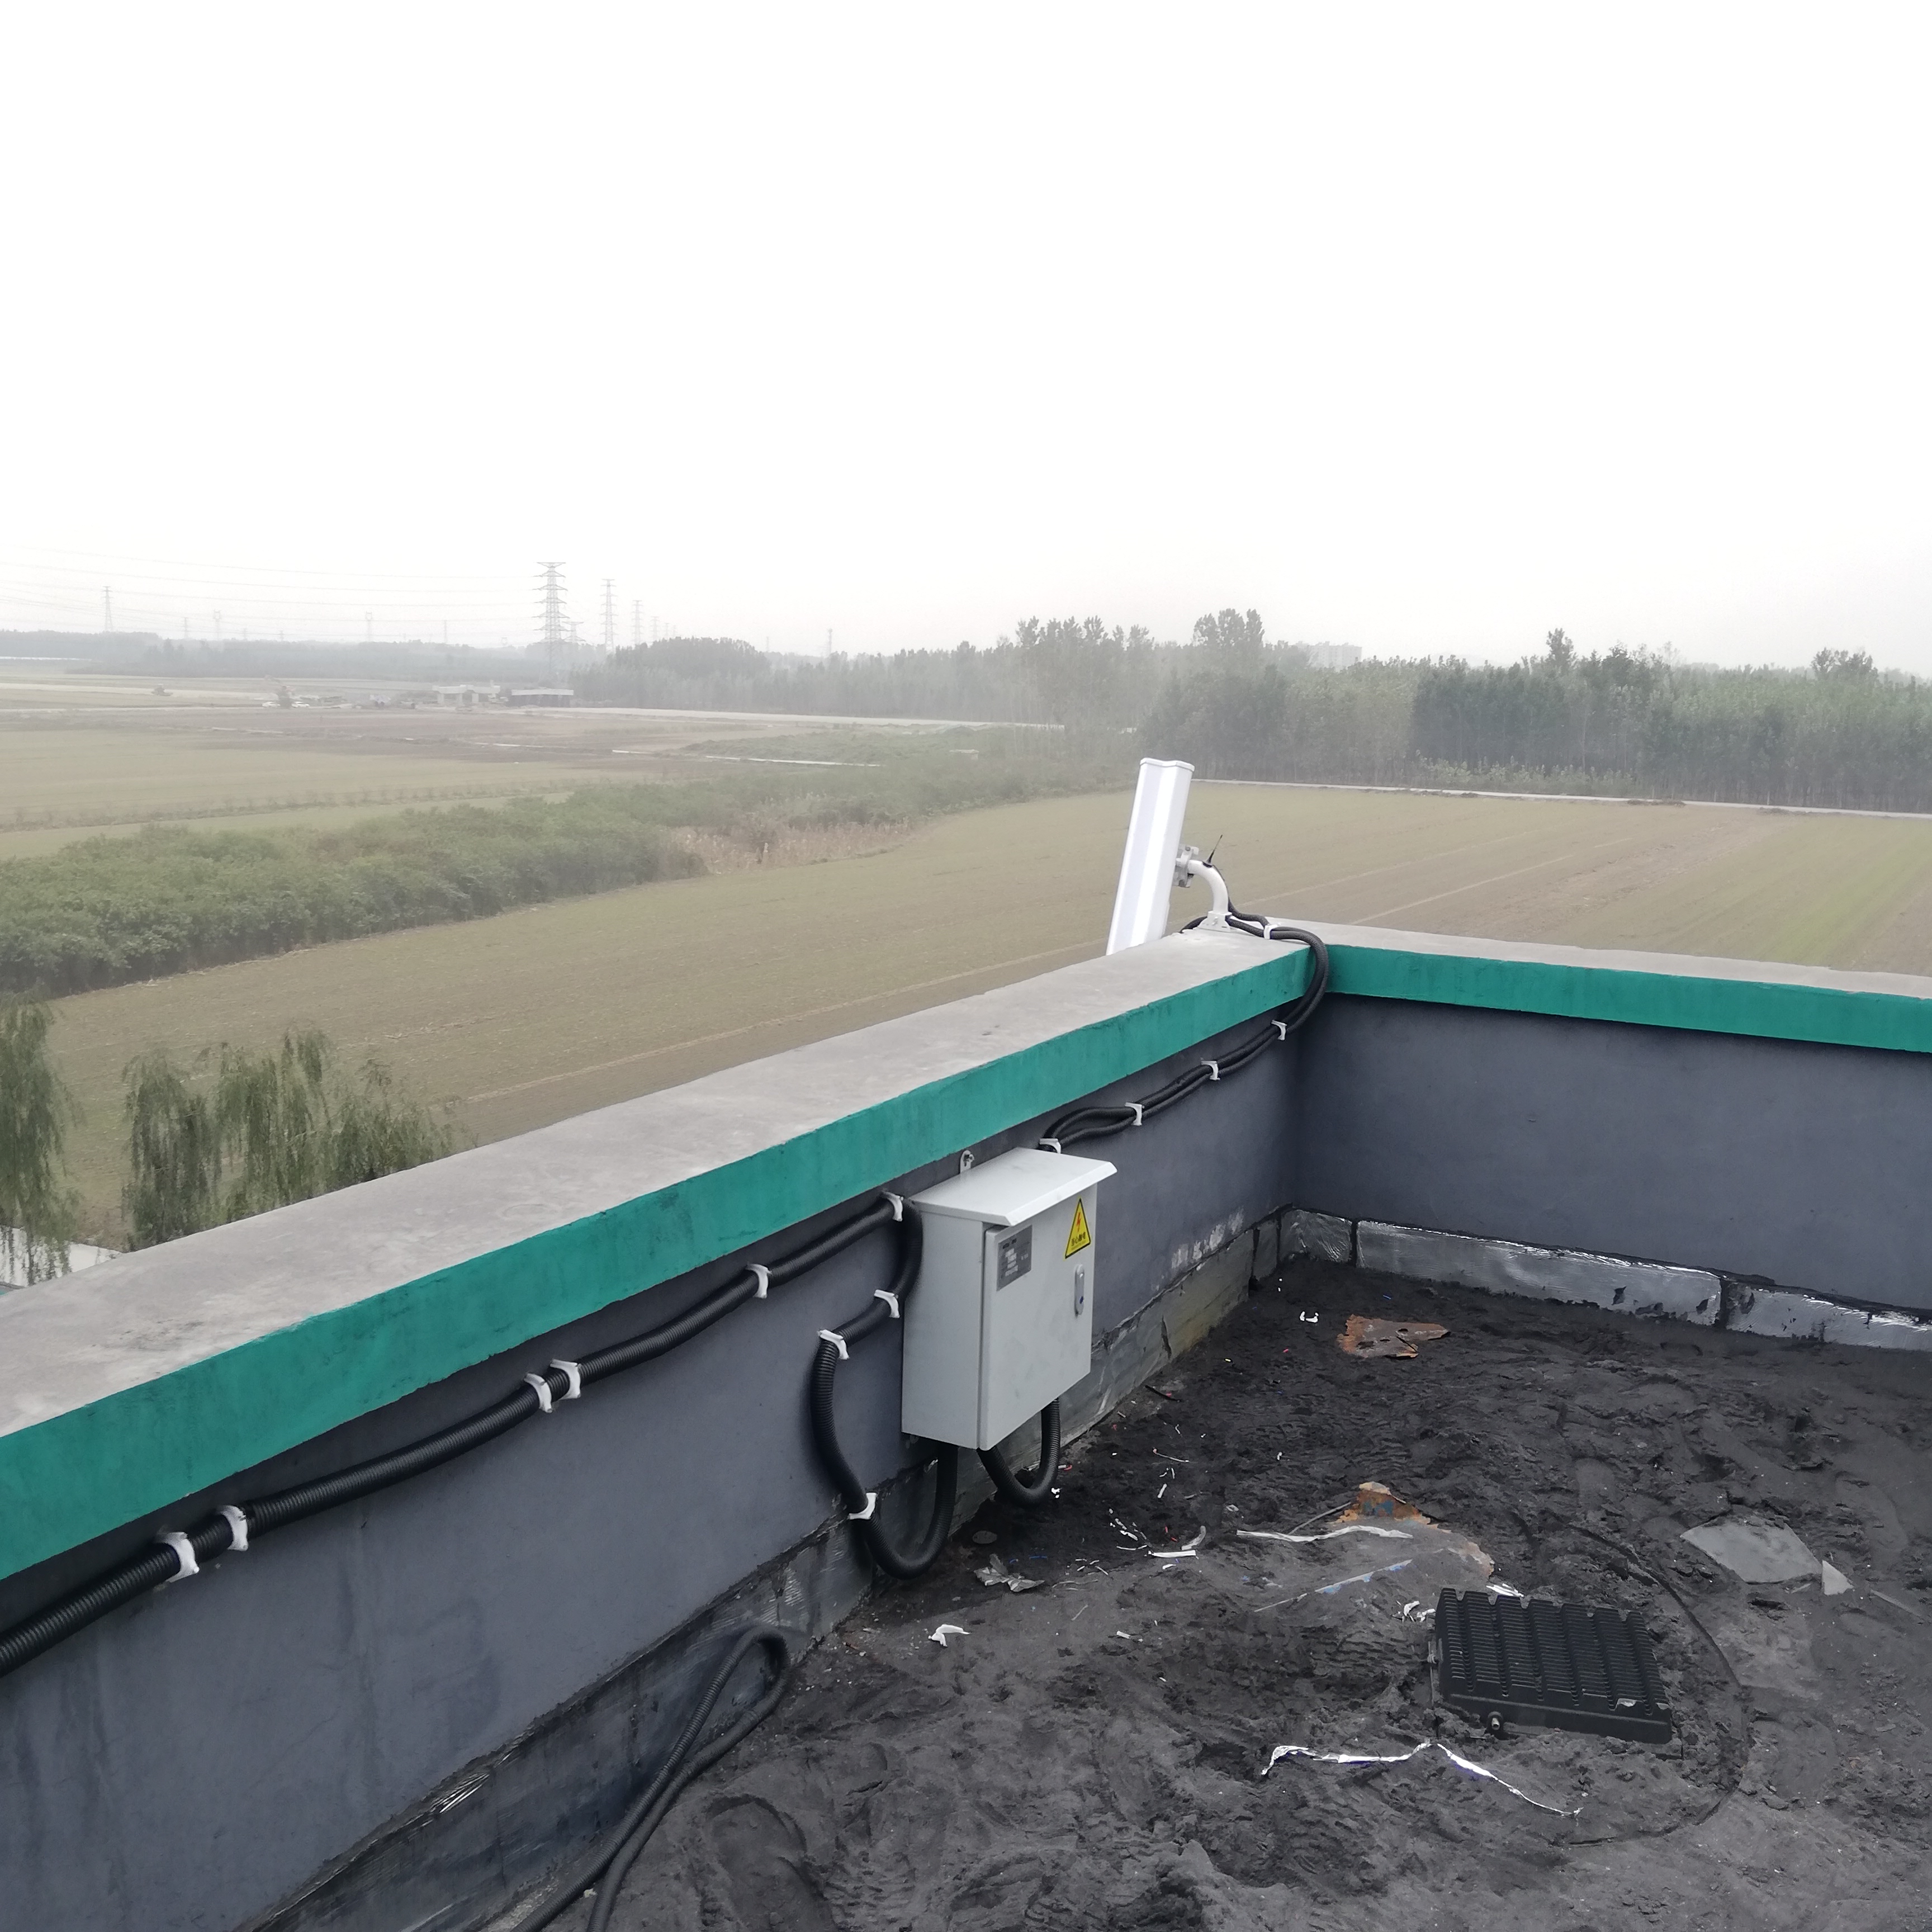 Shandong Shengyang group bridge crane safety monitoring system successfully accepted